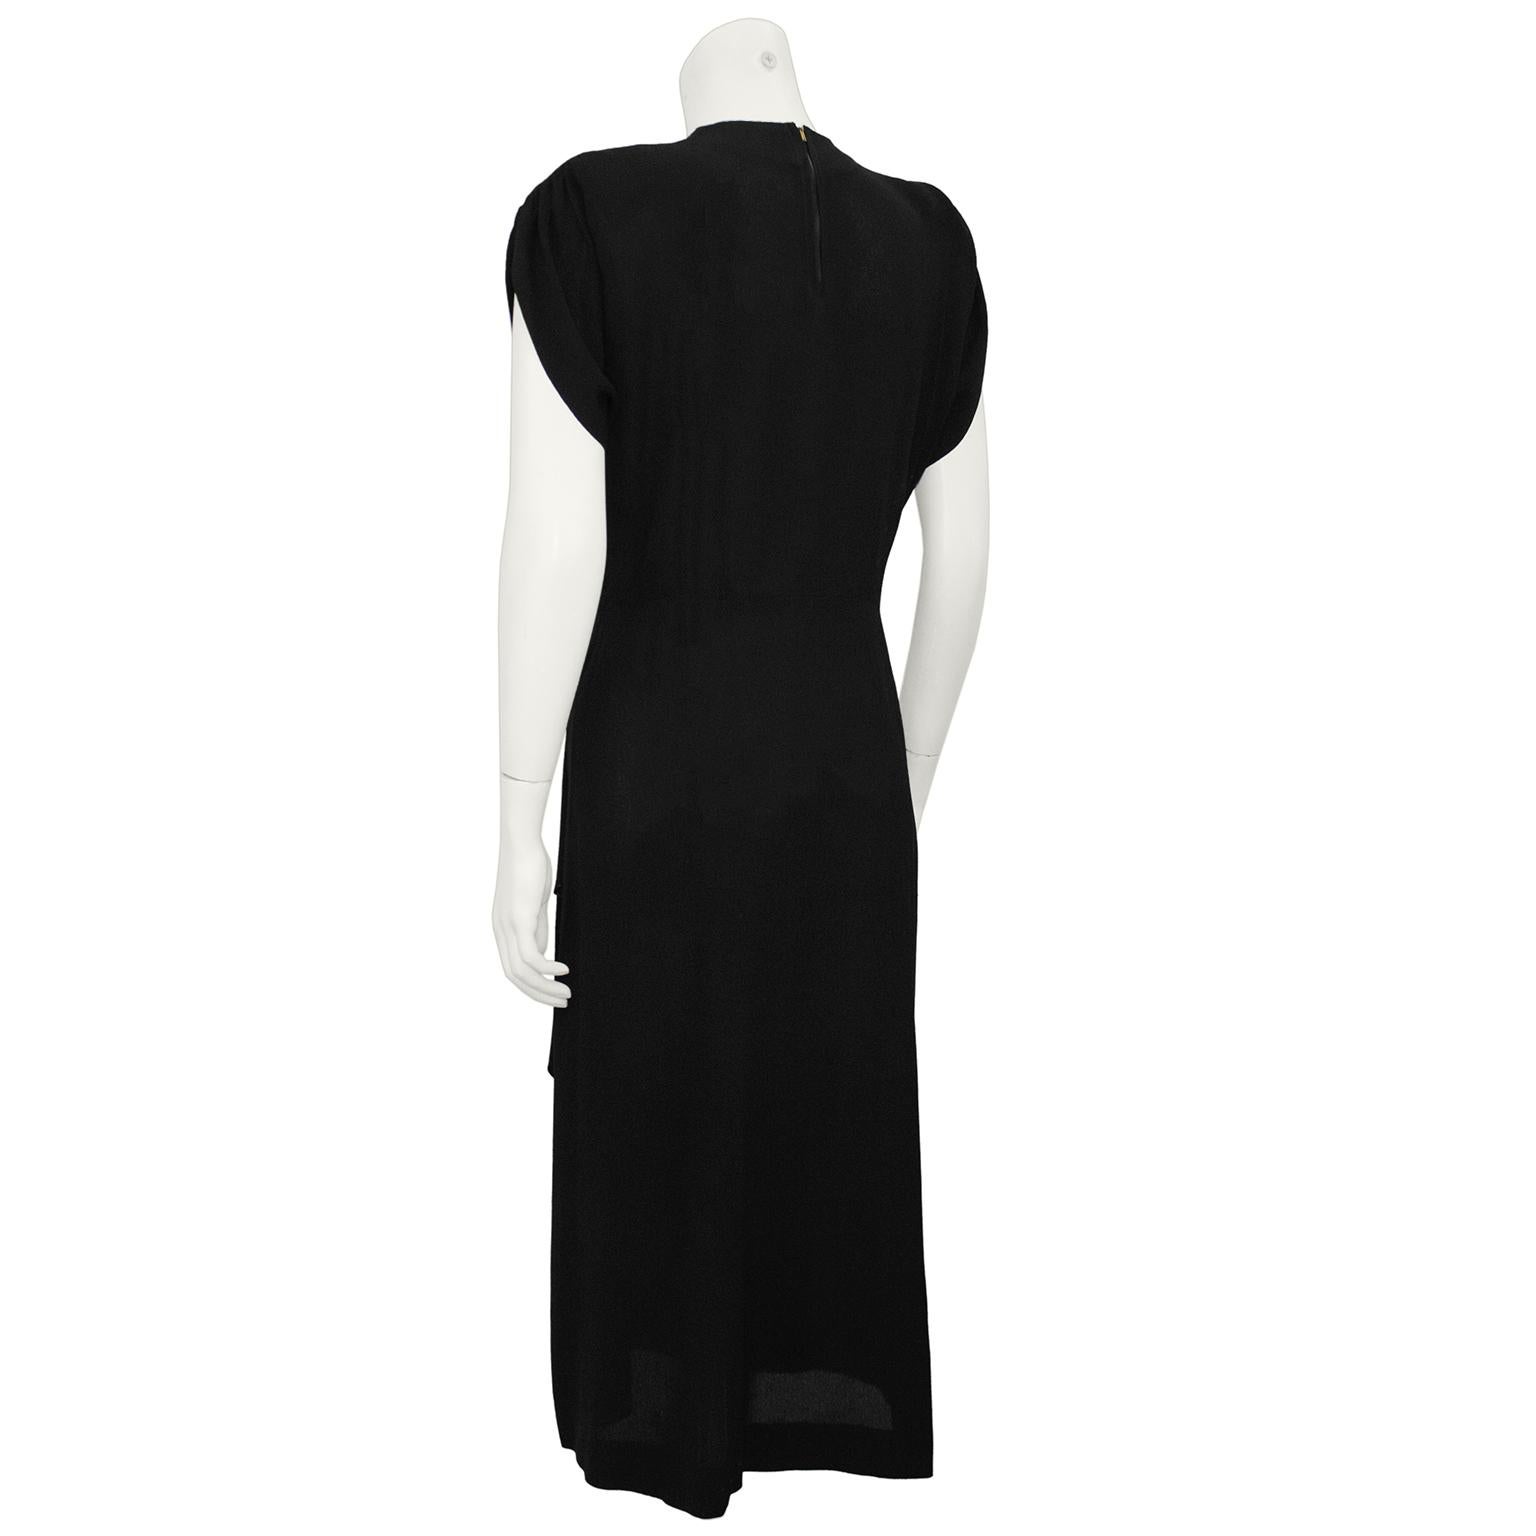 1940s Anonymous Black Crepe Dress with Sequin and Chiffon Neckline In Excellent Condition For Sale In Toronto, Ontario